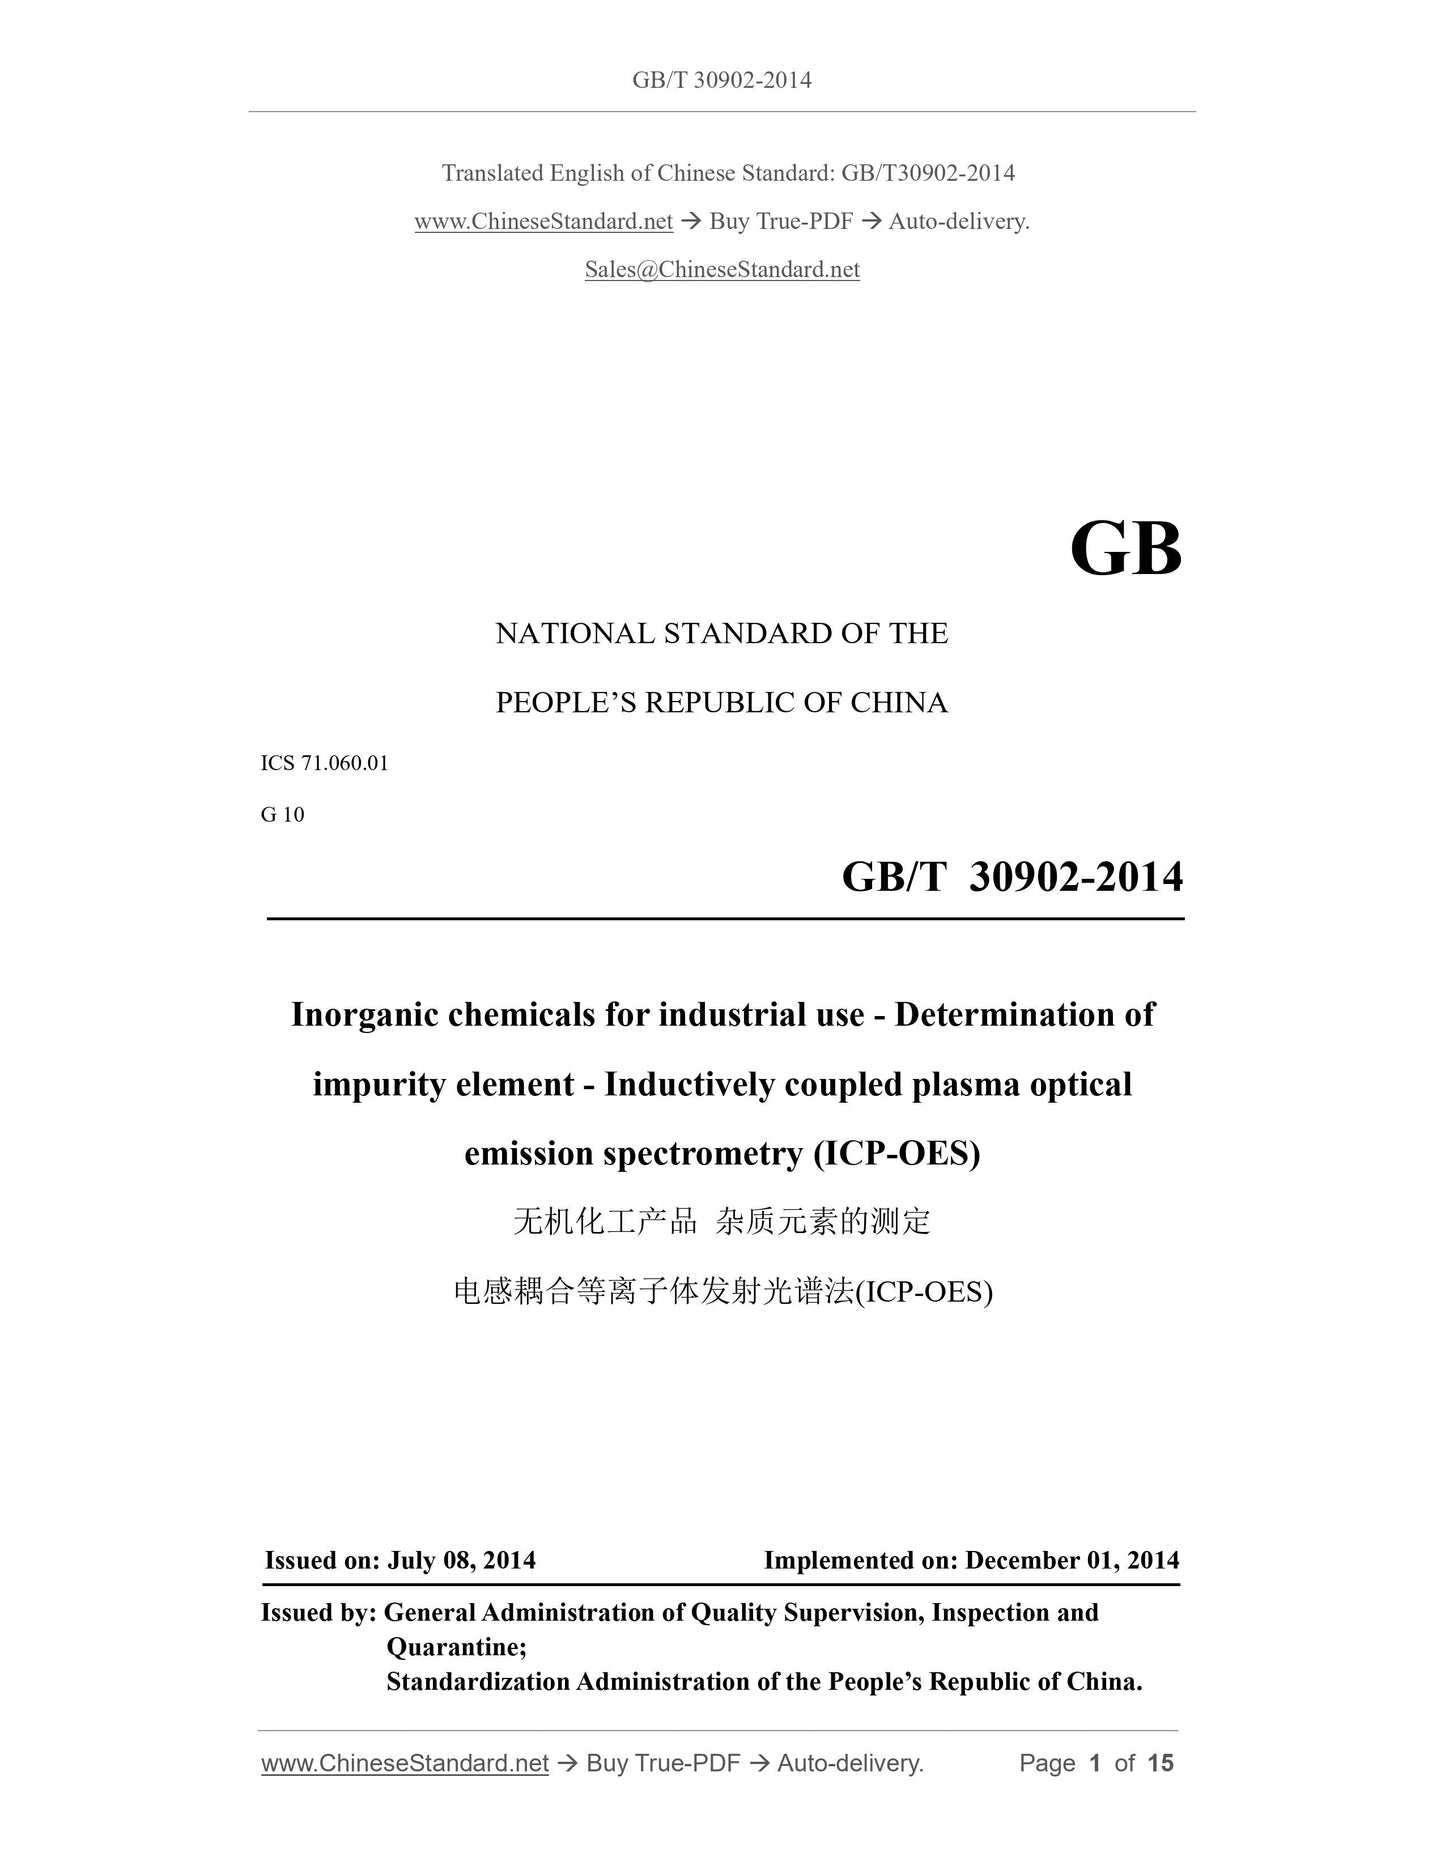 GB/T 30902-2014 Page 1